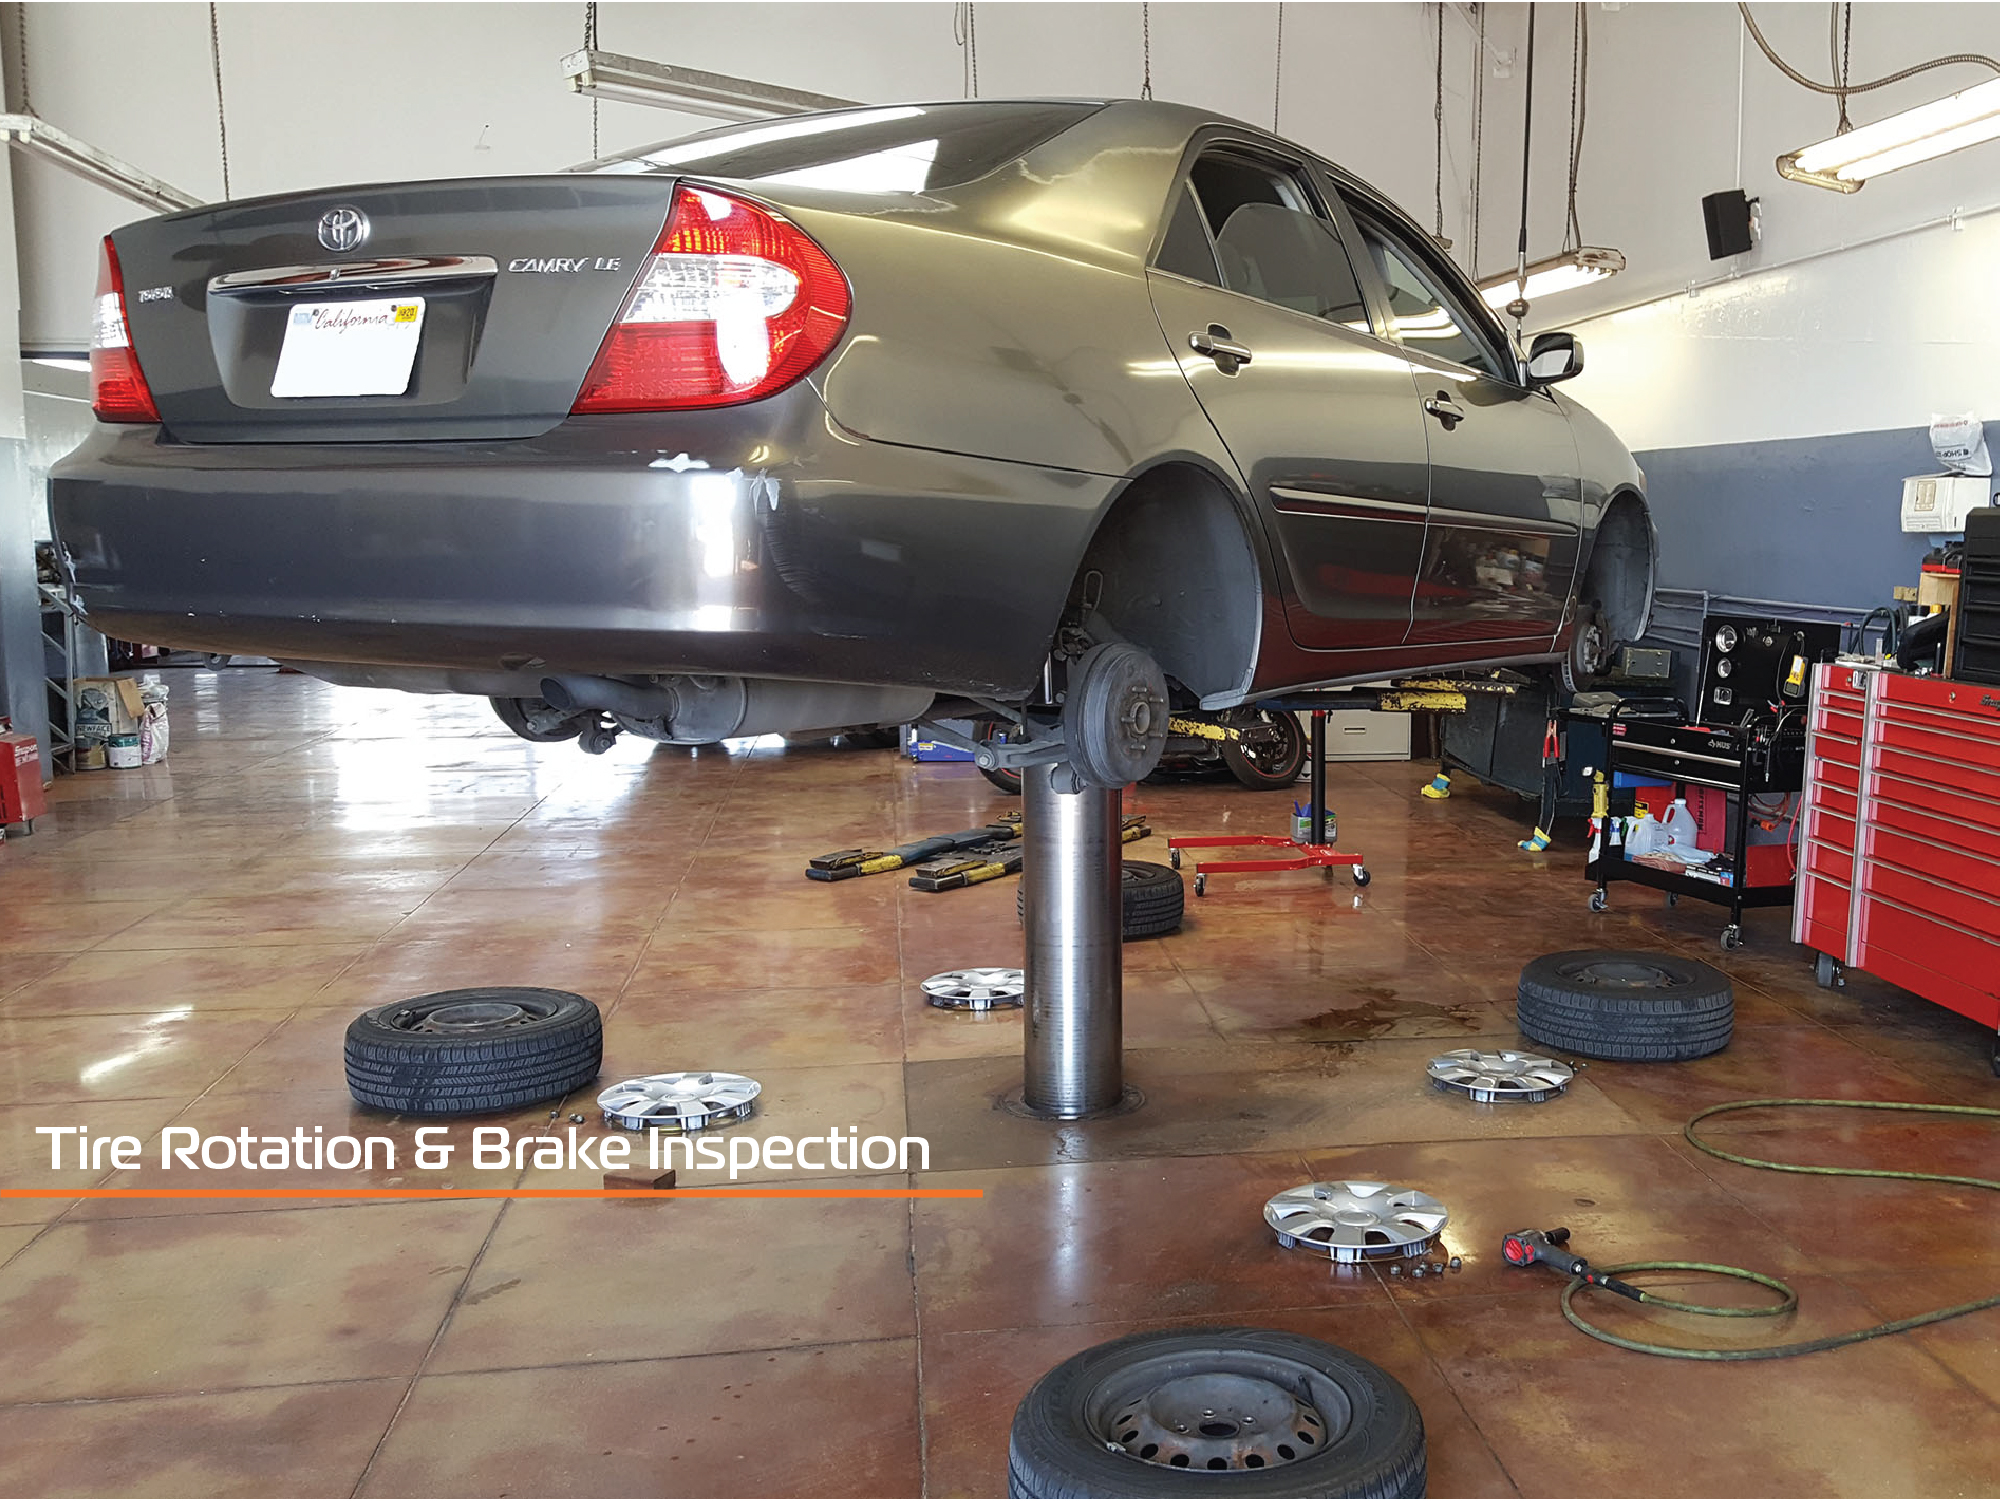 A tire rotation and brake inspection on a Grey Toyota Camry